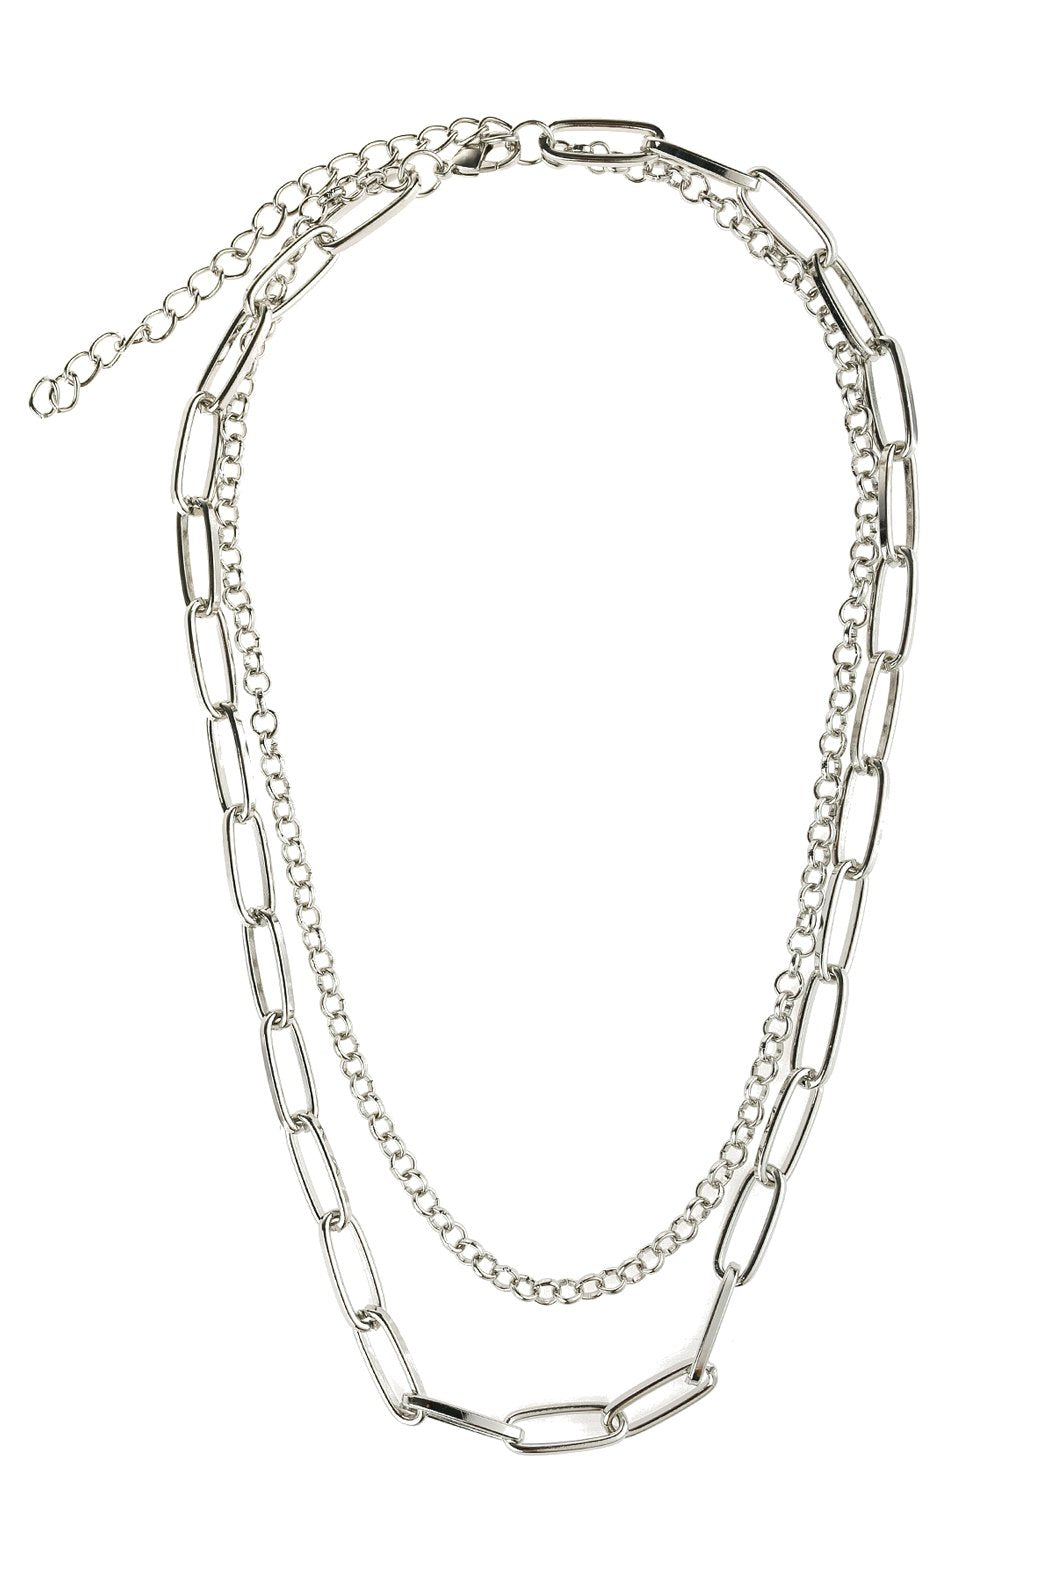 Hdn2973 - Multiline Chain Necklace - LOLA LUXE